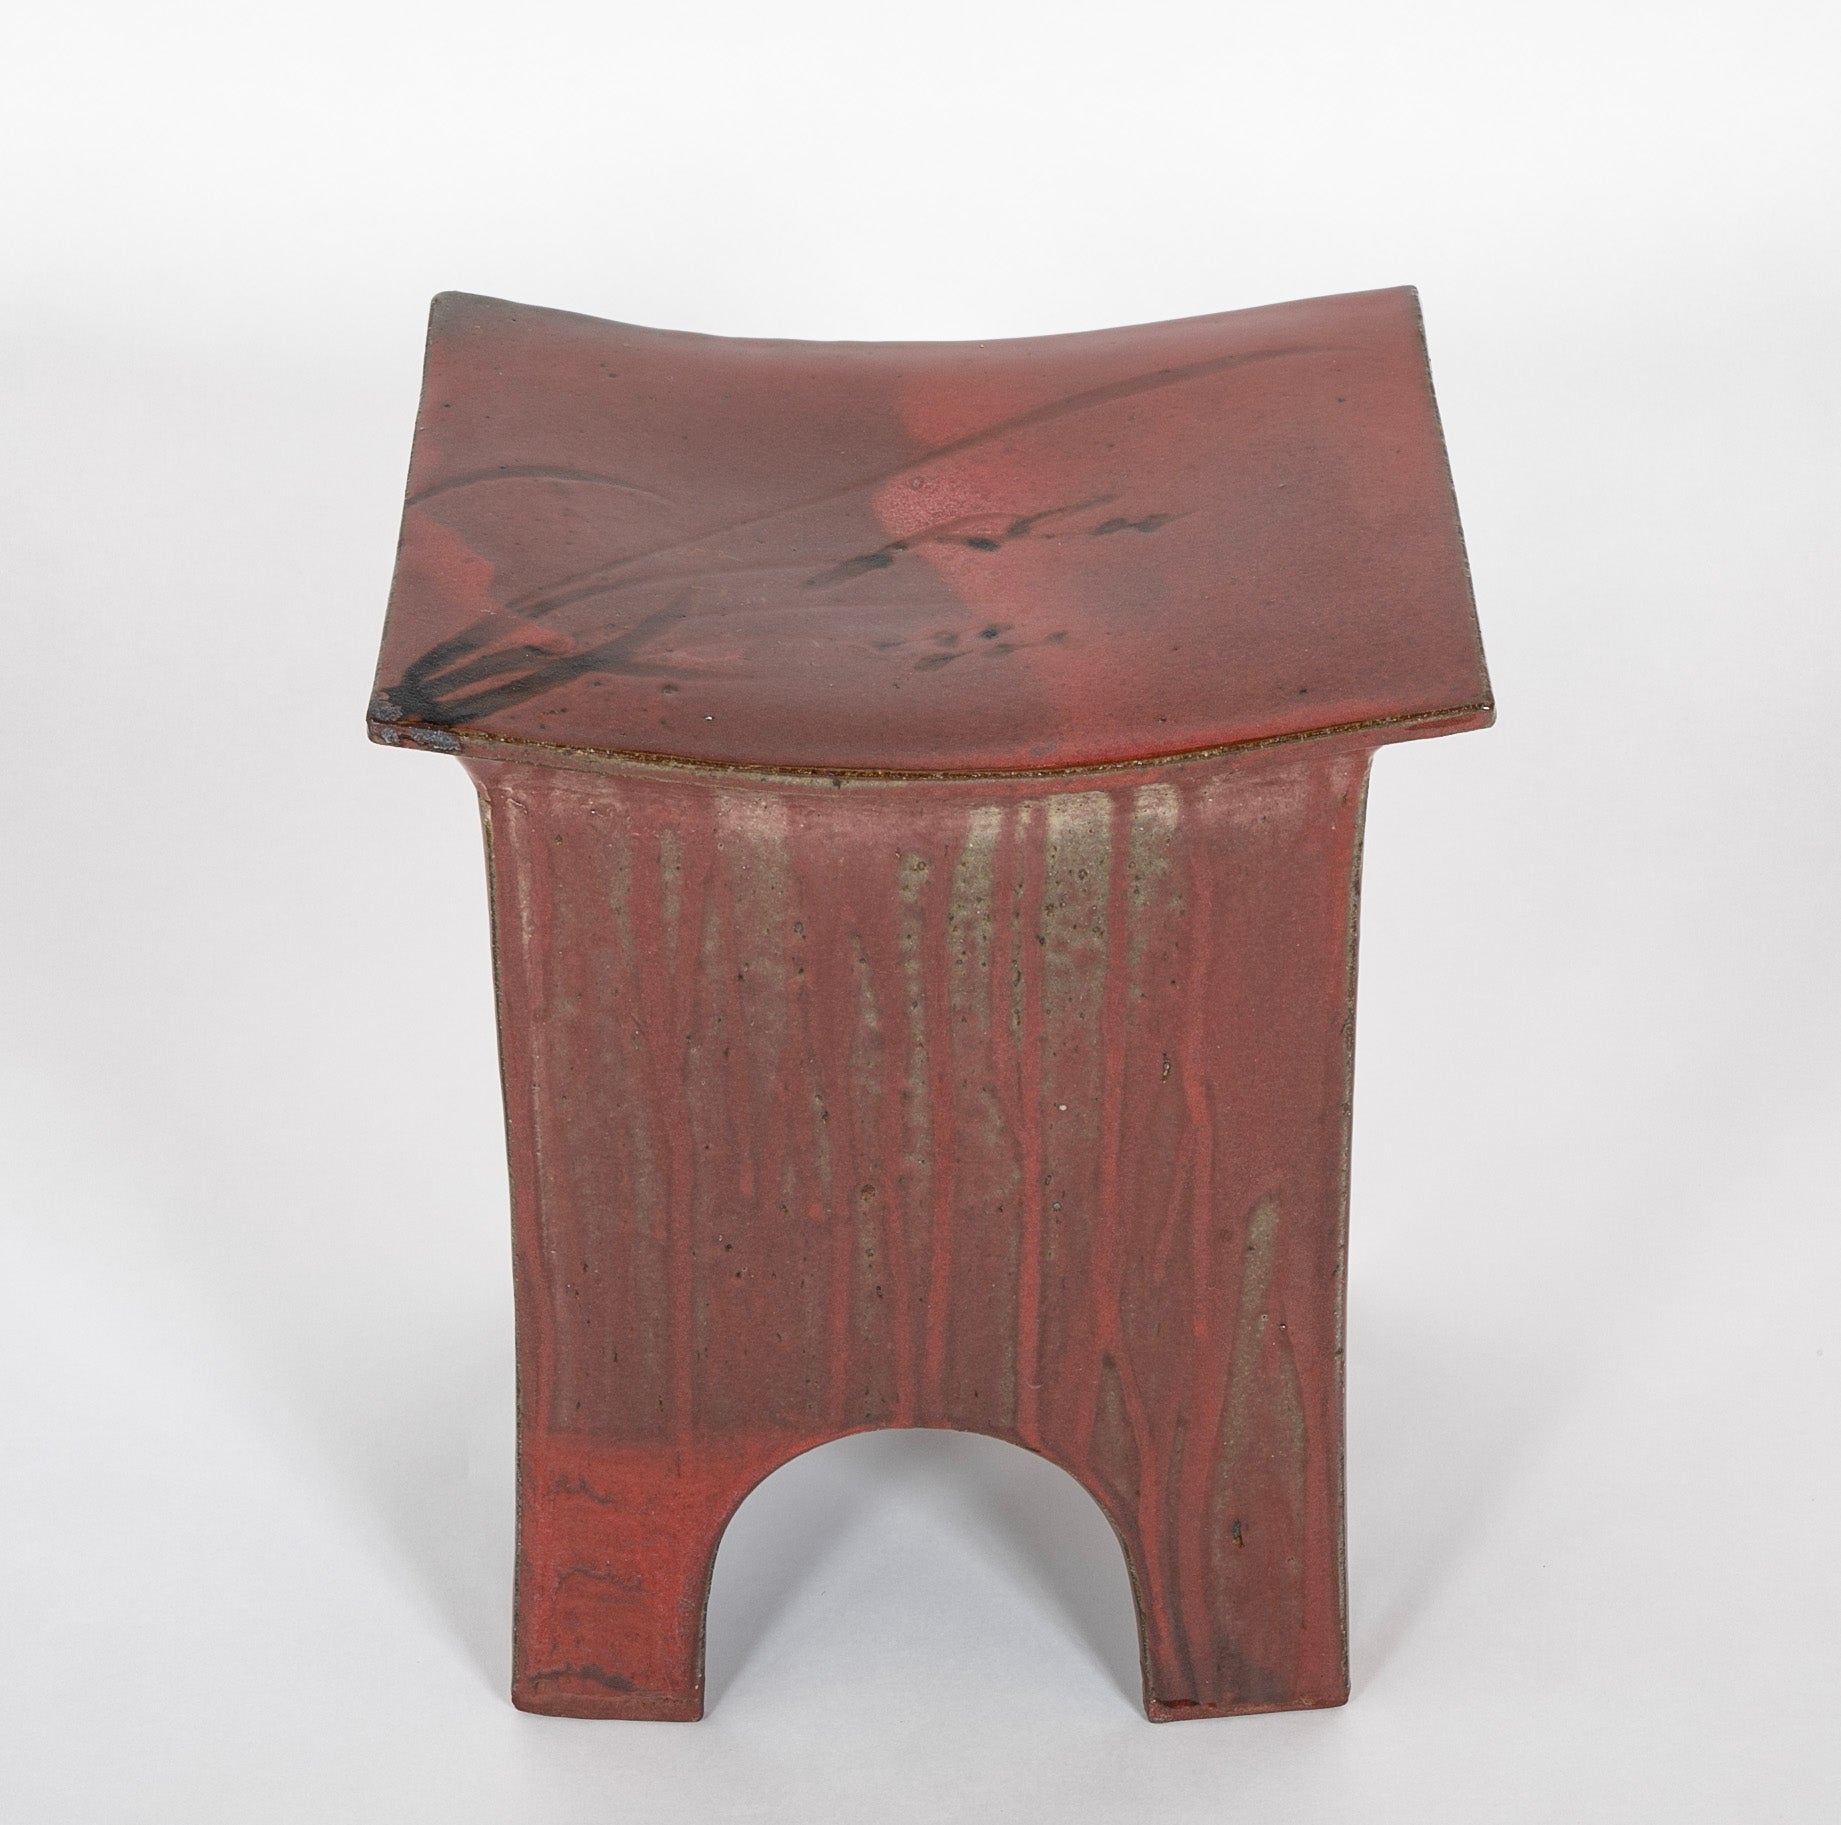 Pottery Stool with Brown Glaze Attributed to Erik O'Leary